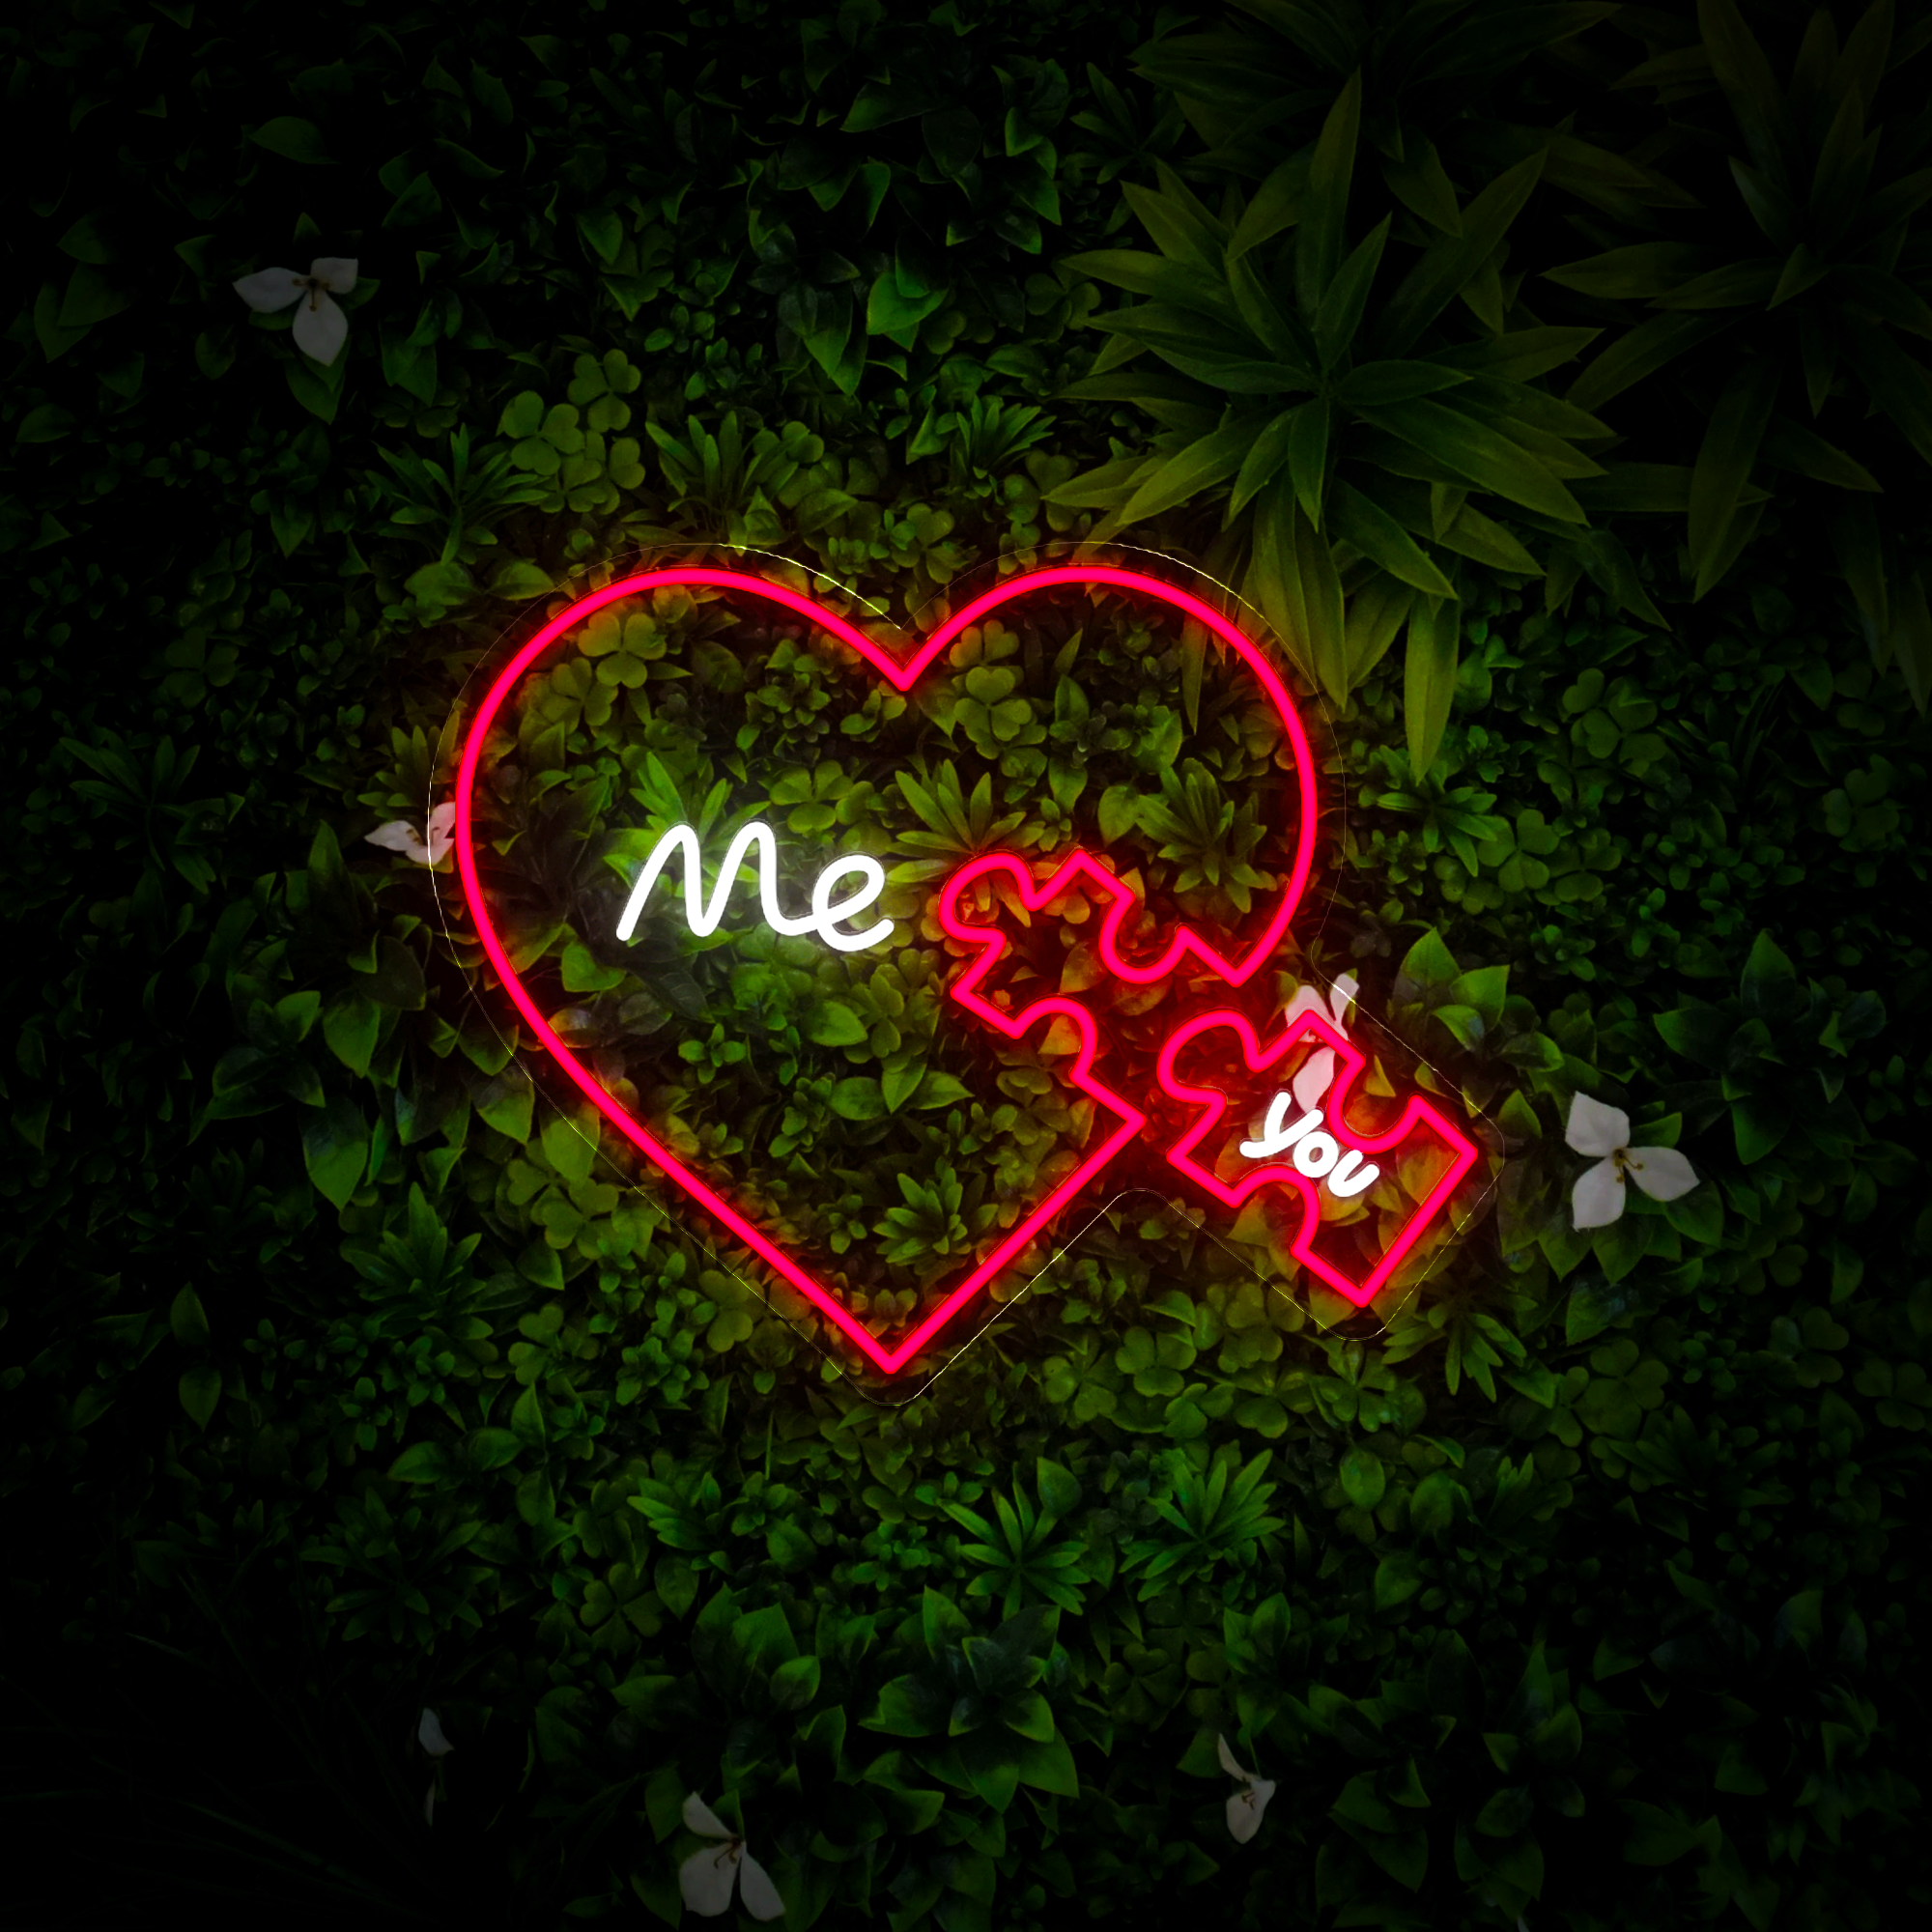 You Complete Me Neon Sign